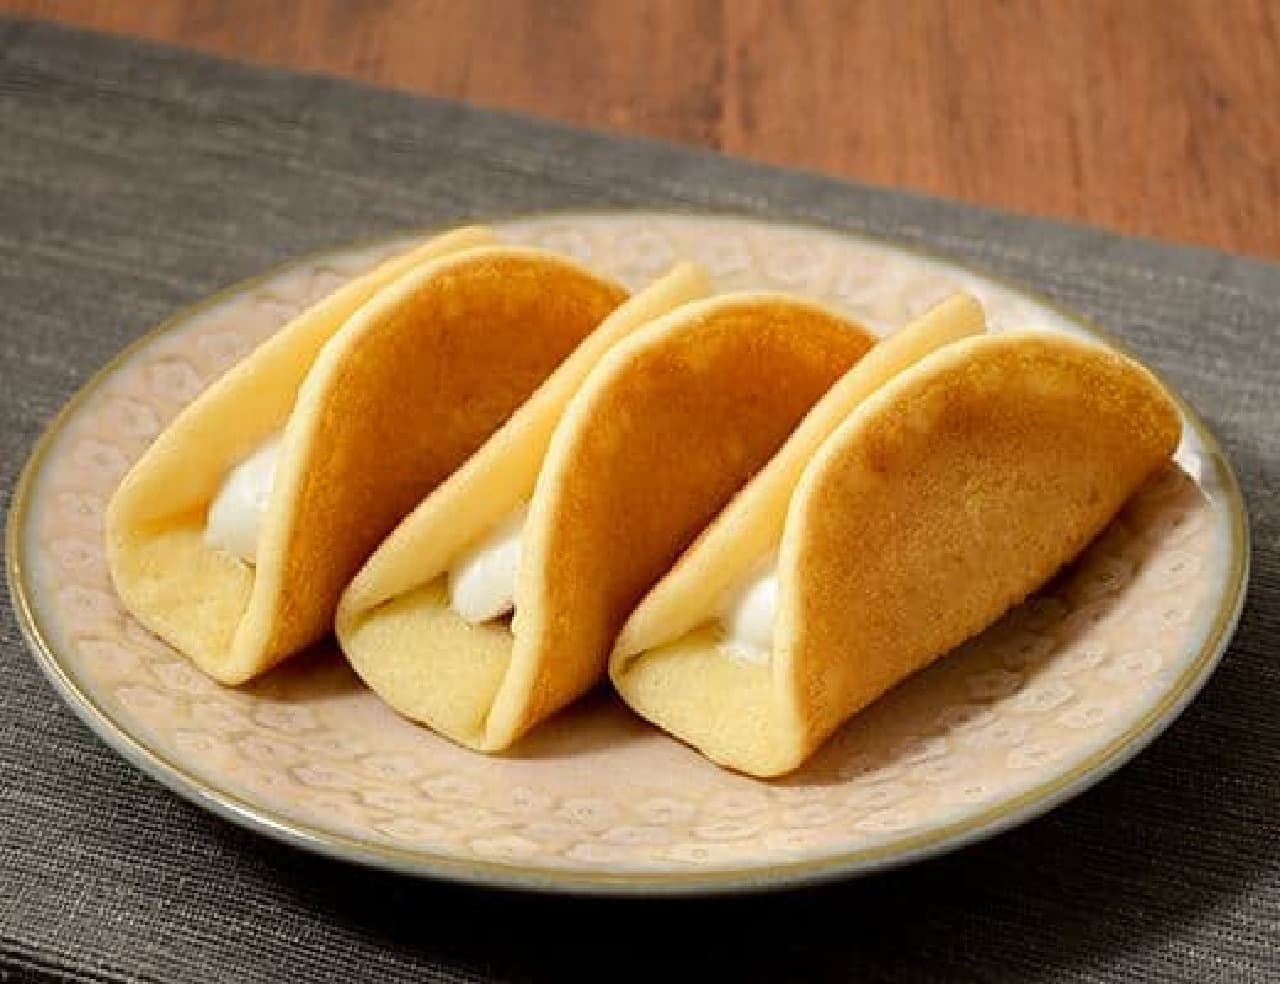 LAWSON "Wrapped Pancakes - 3 pieces with sweet bean paste & whip